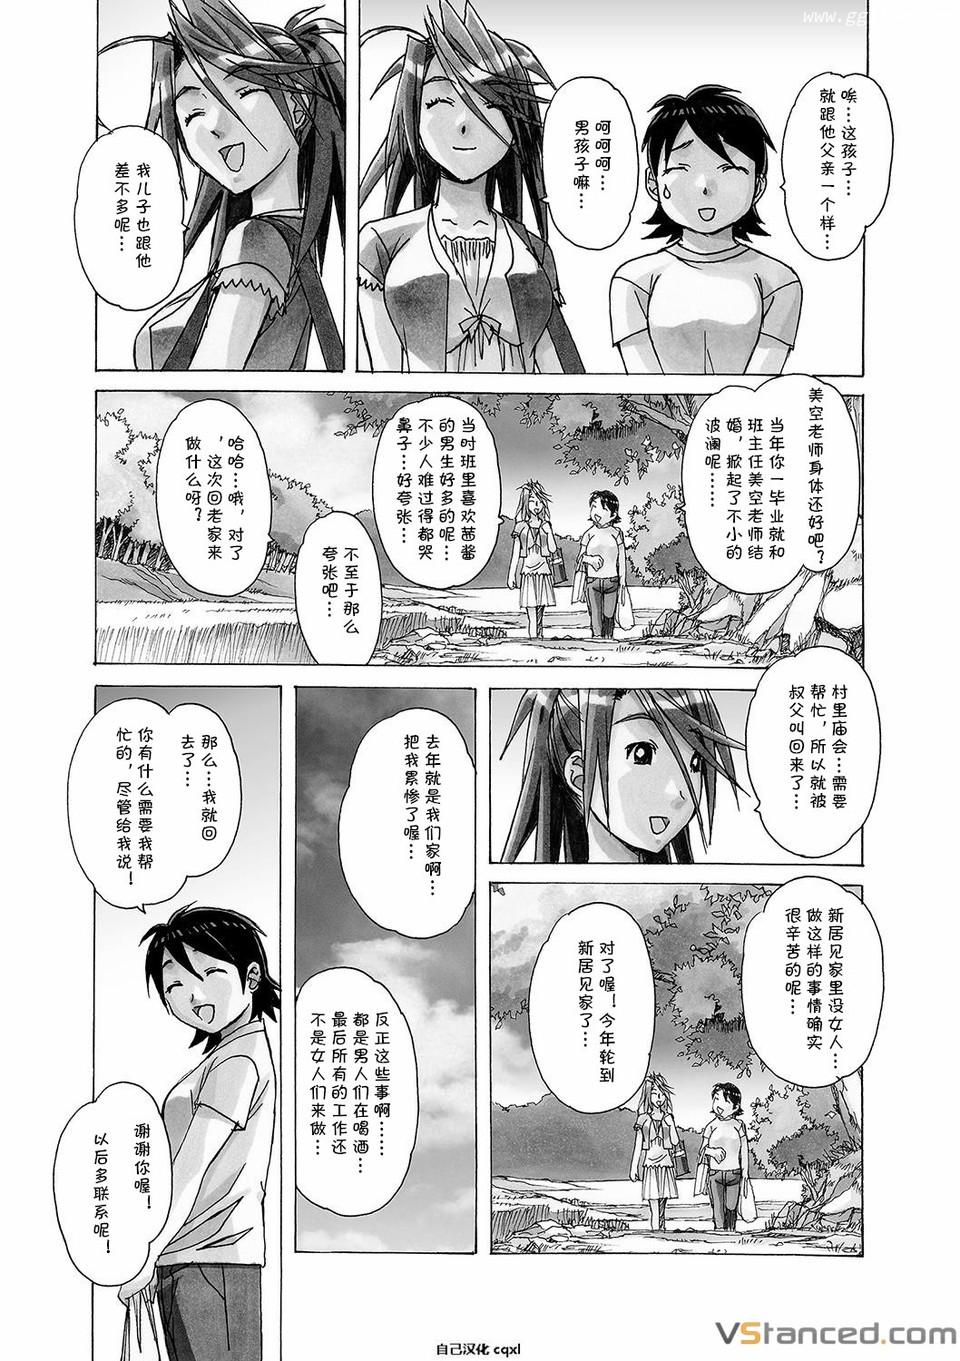 Spooning AKANE vol.03 - Original First Time - Page 5